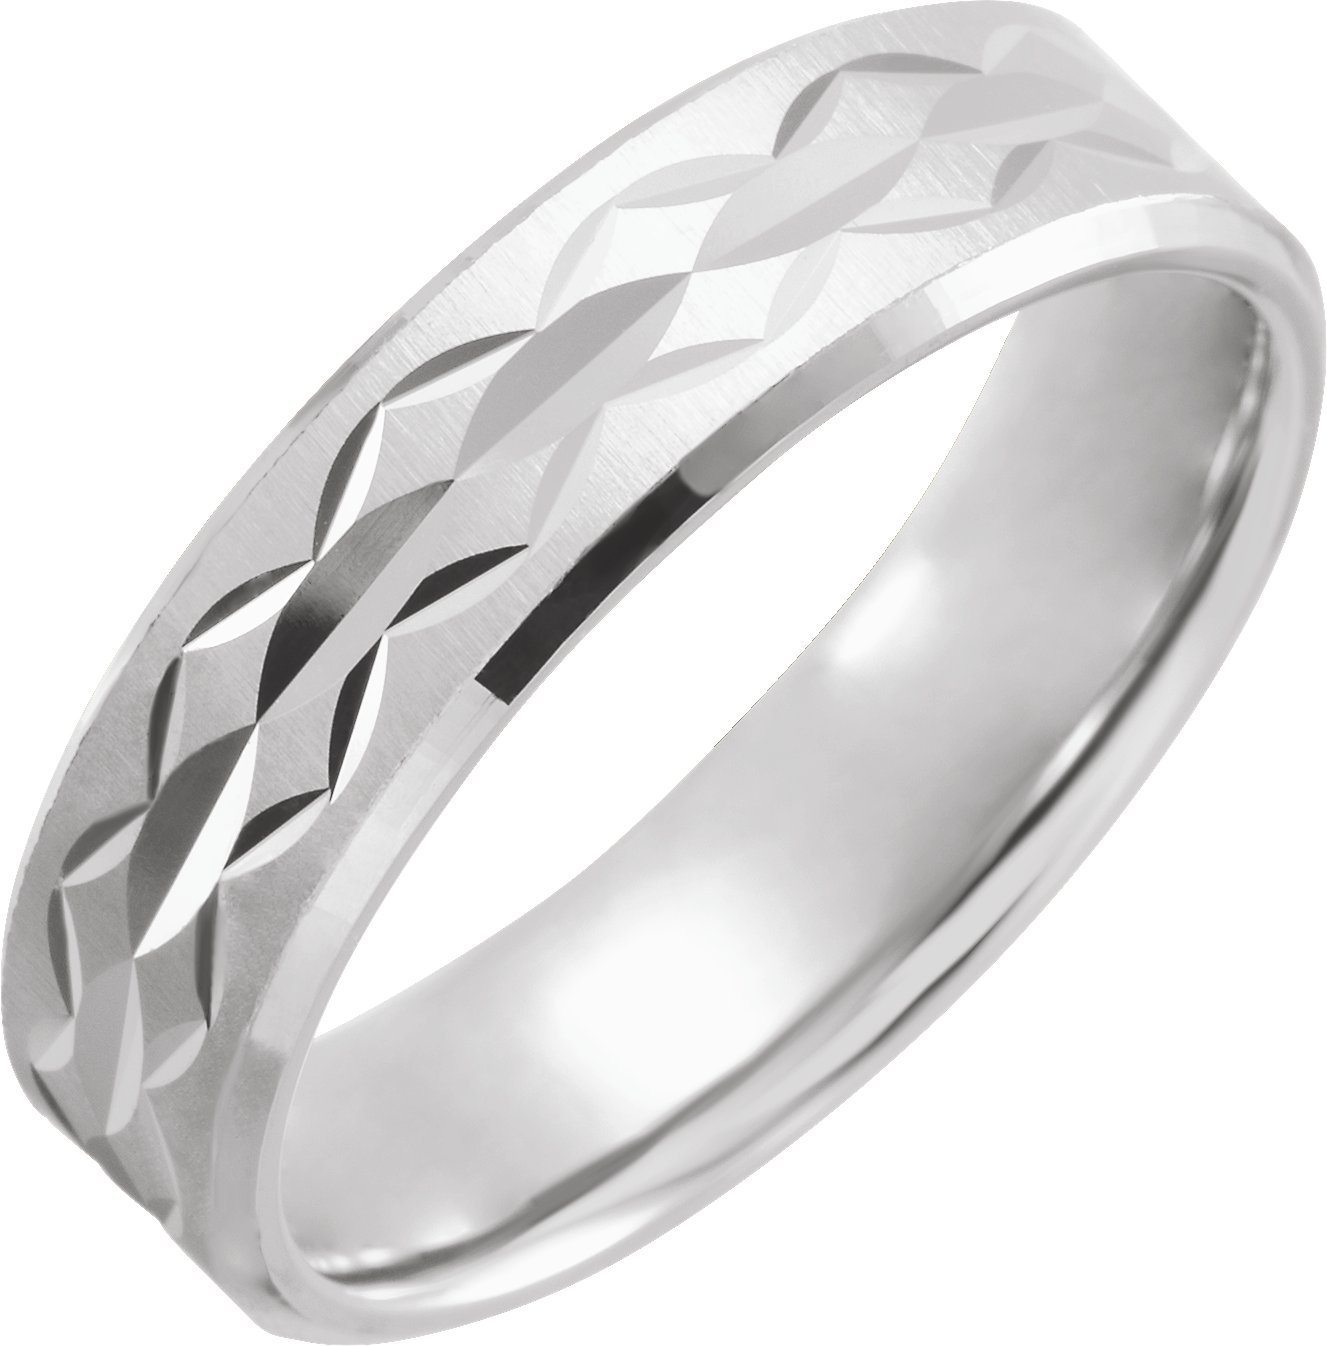 Sterling Silver 6 mm Design Band with Satin Polished Finish Size 12.5 Ref 16486111